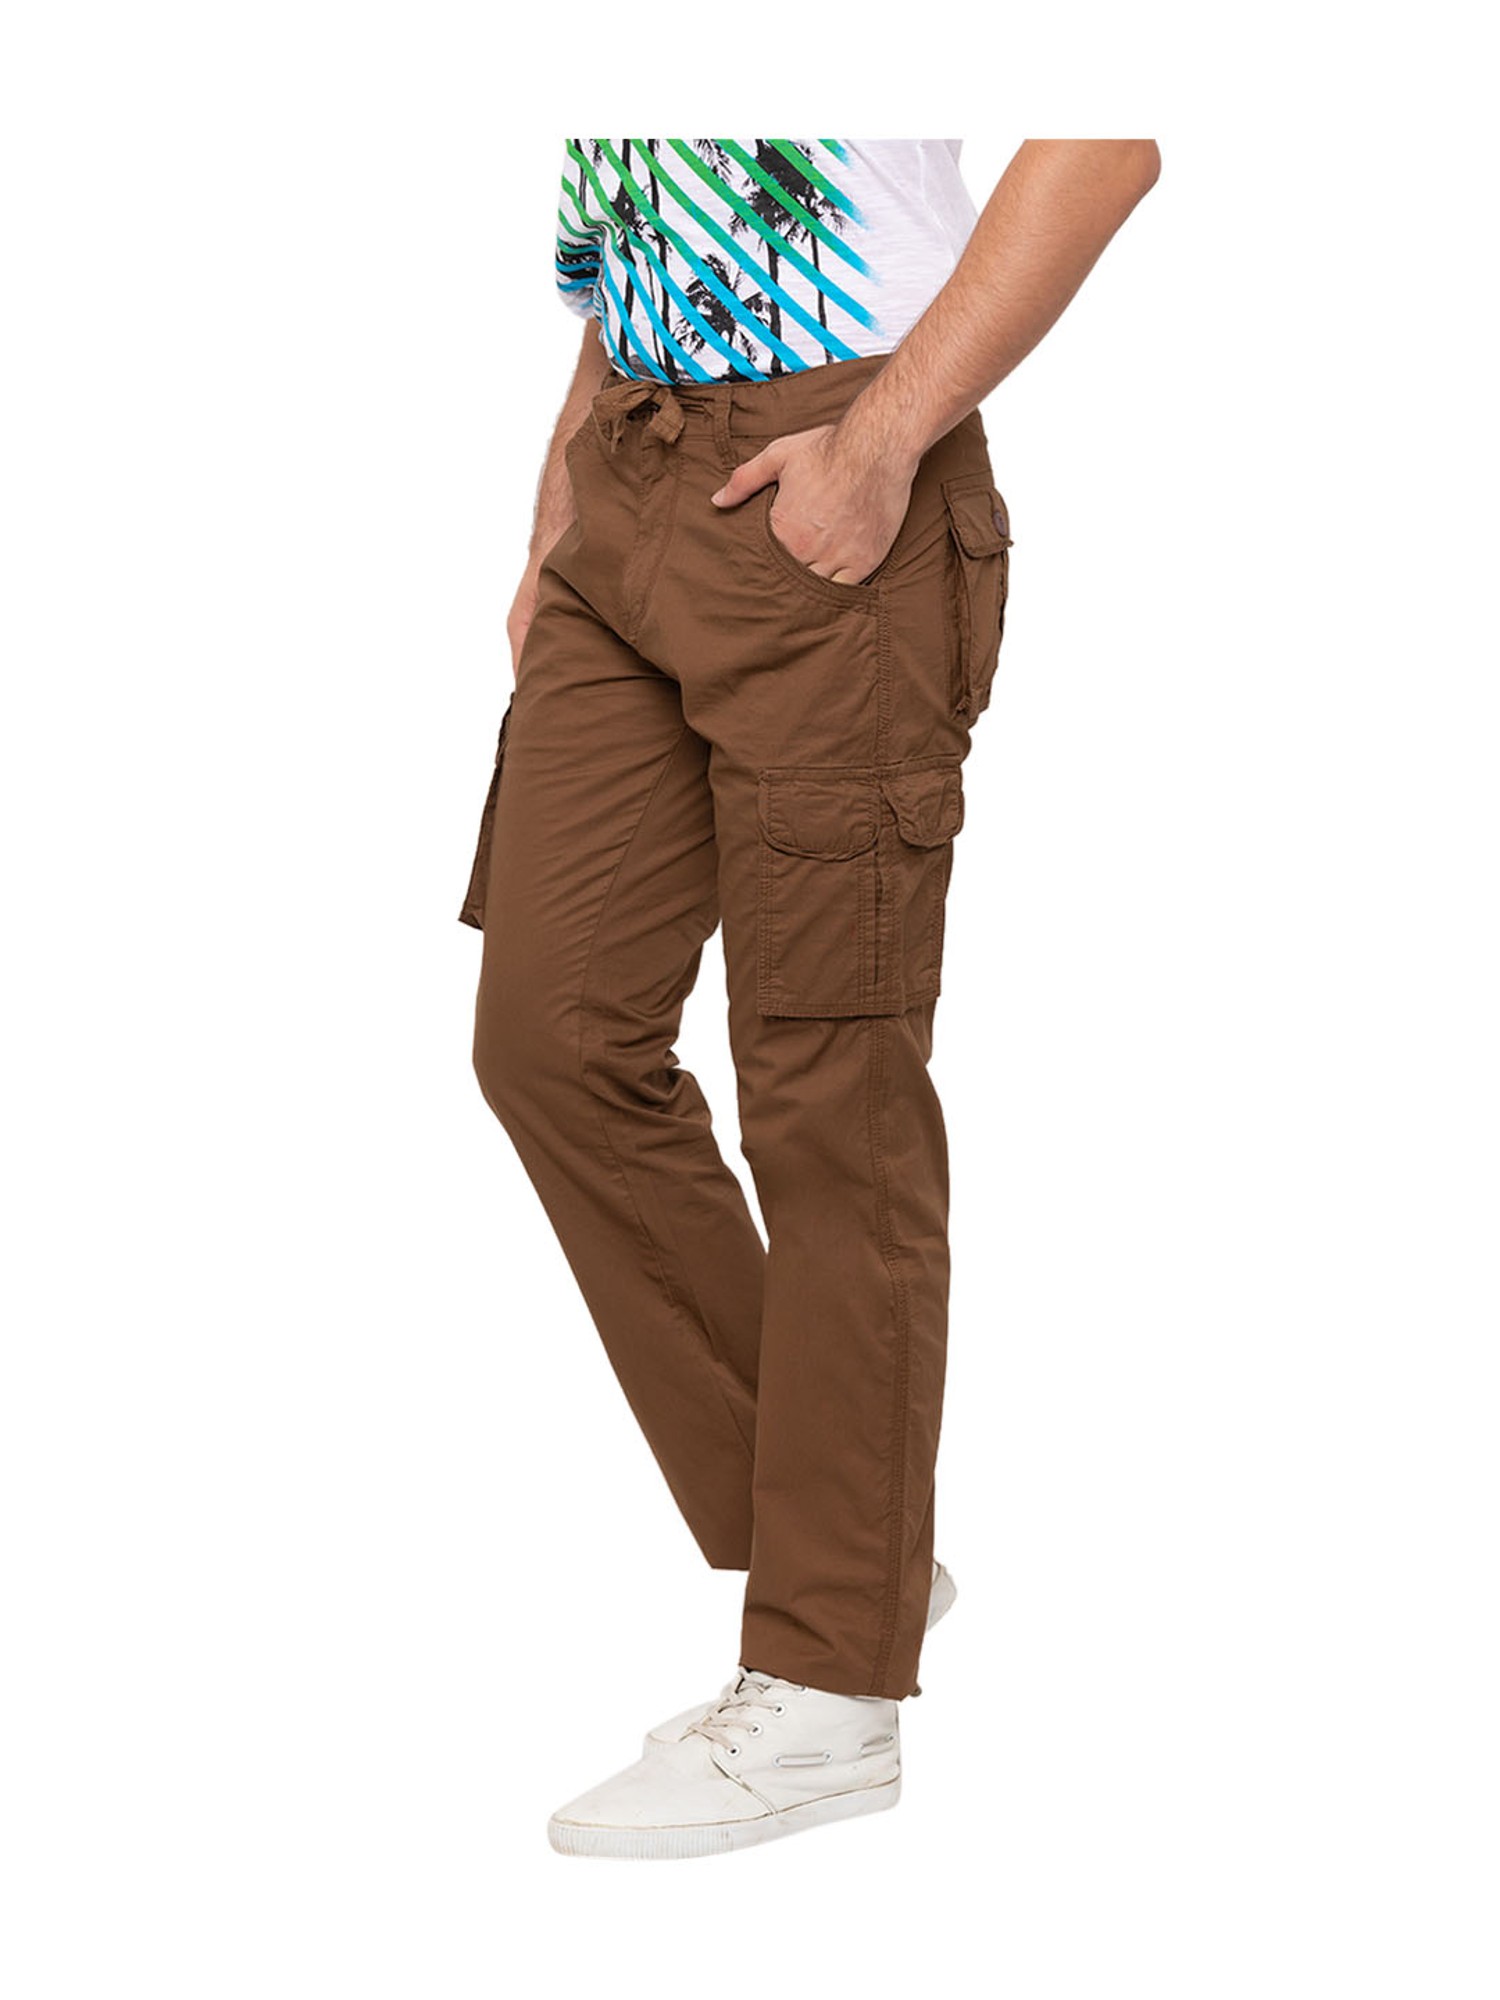 Muscle Fit Cargo Pants  Made with HyperStretch Fabric for Pure Comfort  Olympvs